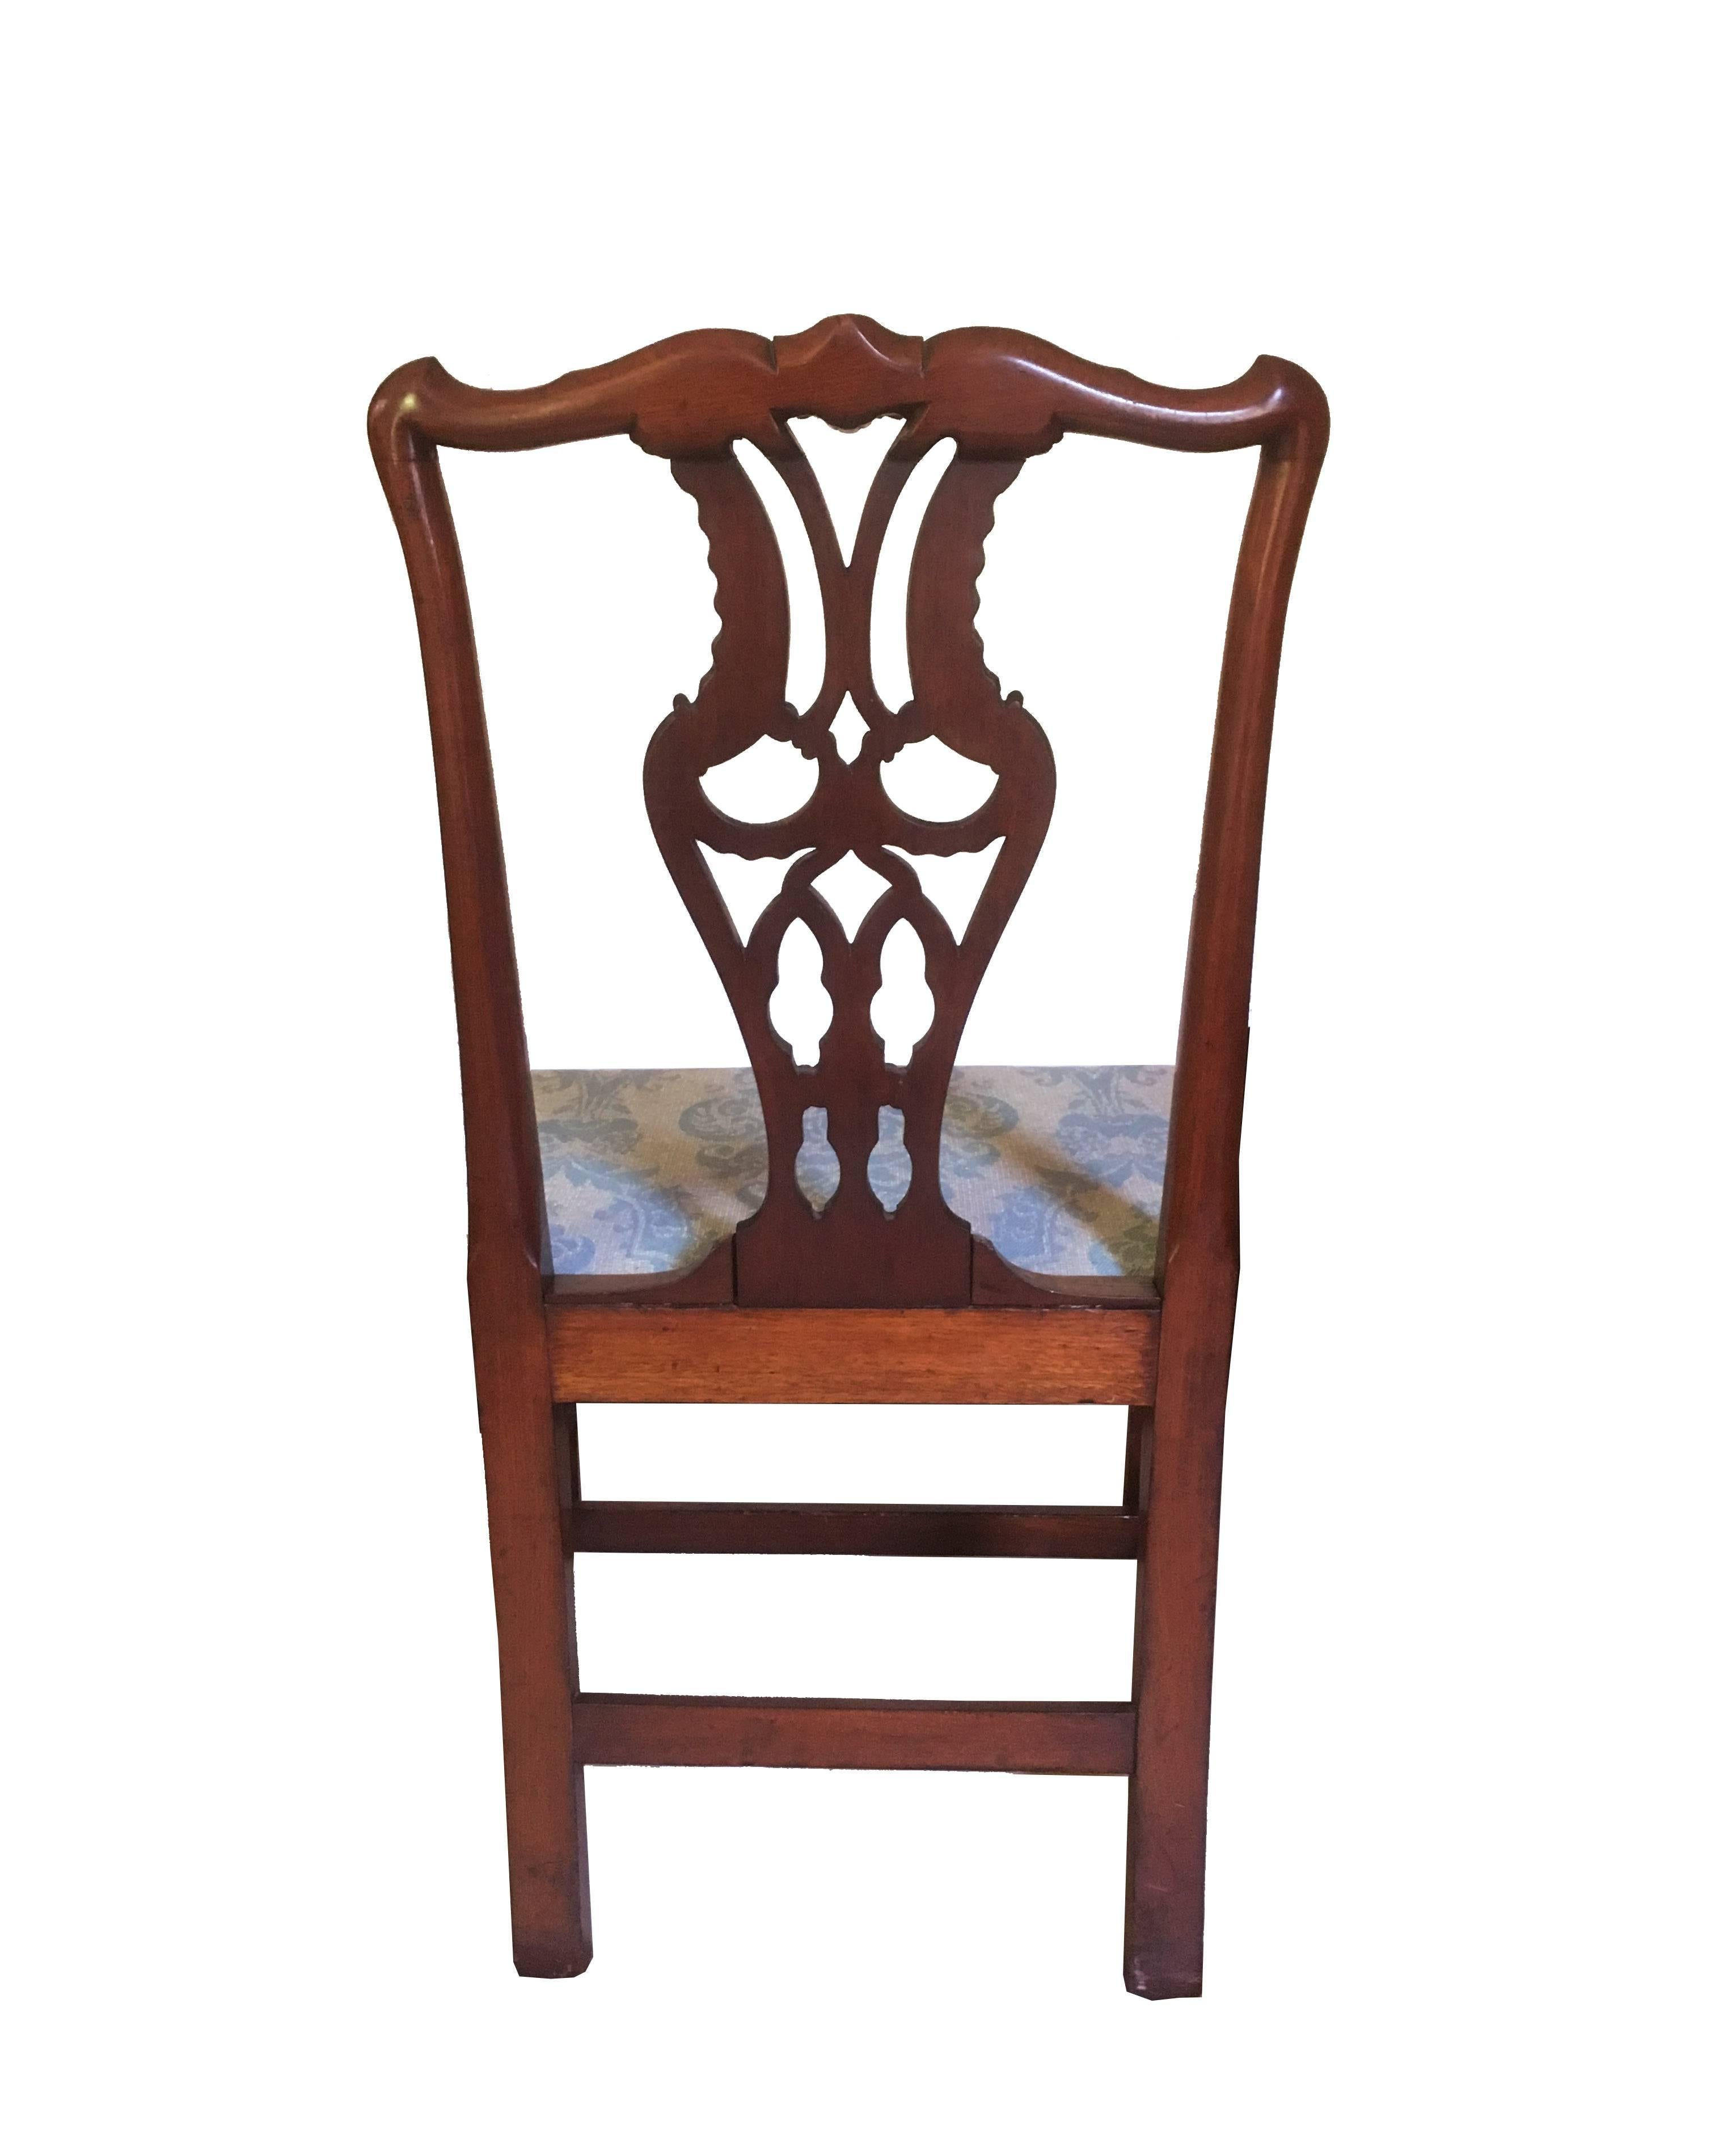 18th century chippendale chair